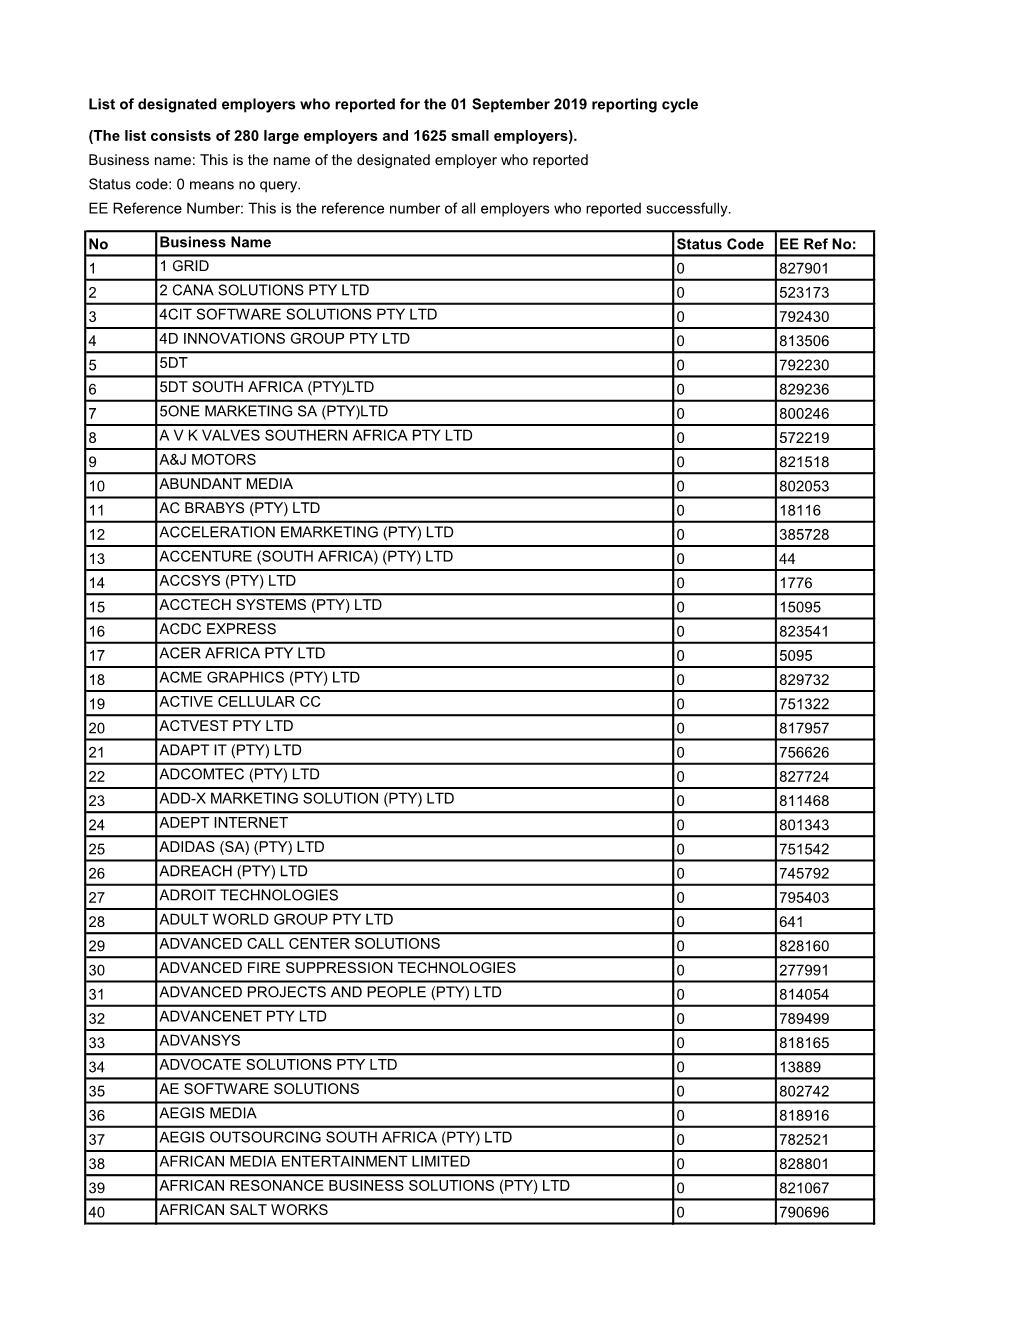 List of Designated Employers Who Reported for the 01 September 2019 Reporting Cycle (The List Consists of 280 Large Employers An